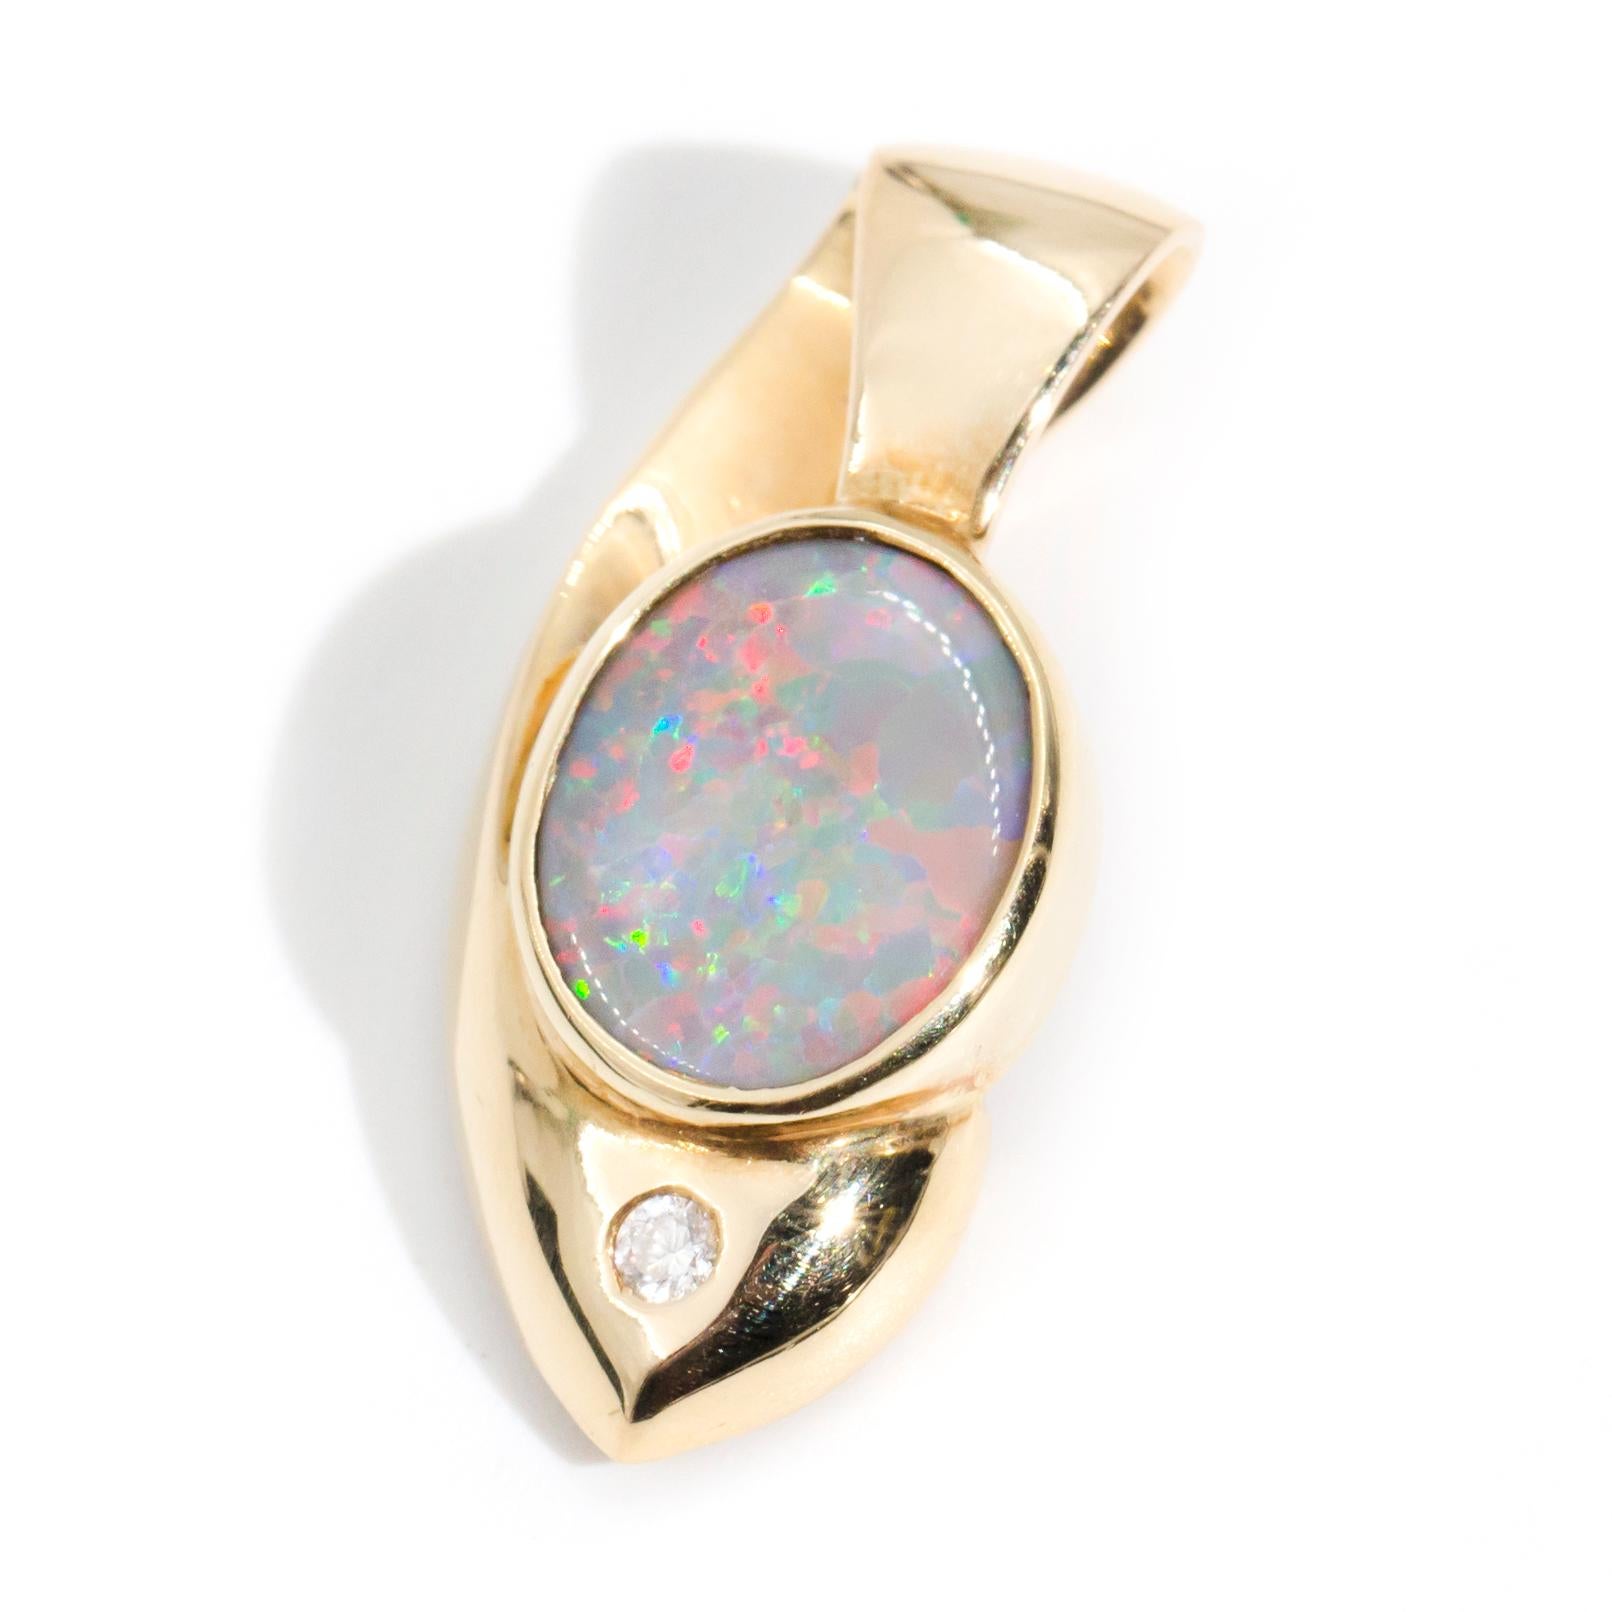 Crafted in 18 carat yellow gold, this charming vintage pendant holds an alluring opal blazen with playful splashes of red and green, resting in a classic oval setting under which lies a sparkling round brilliant diamond. We have named this luminous